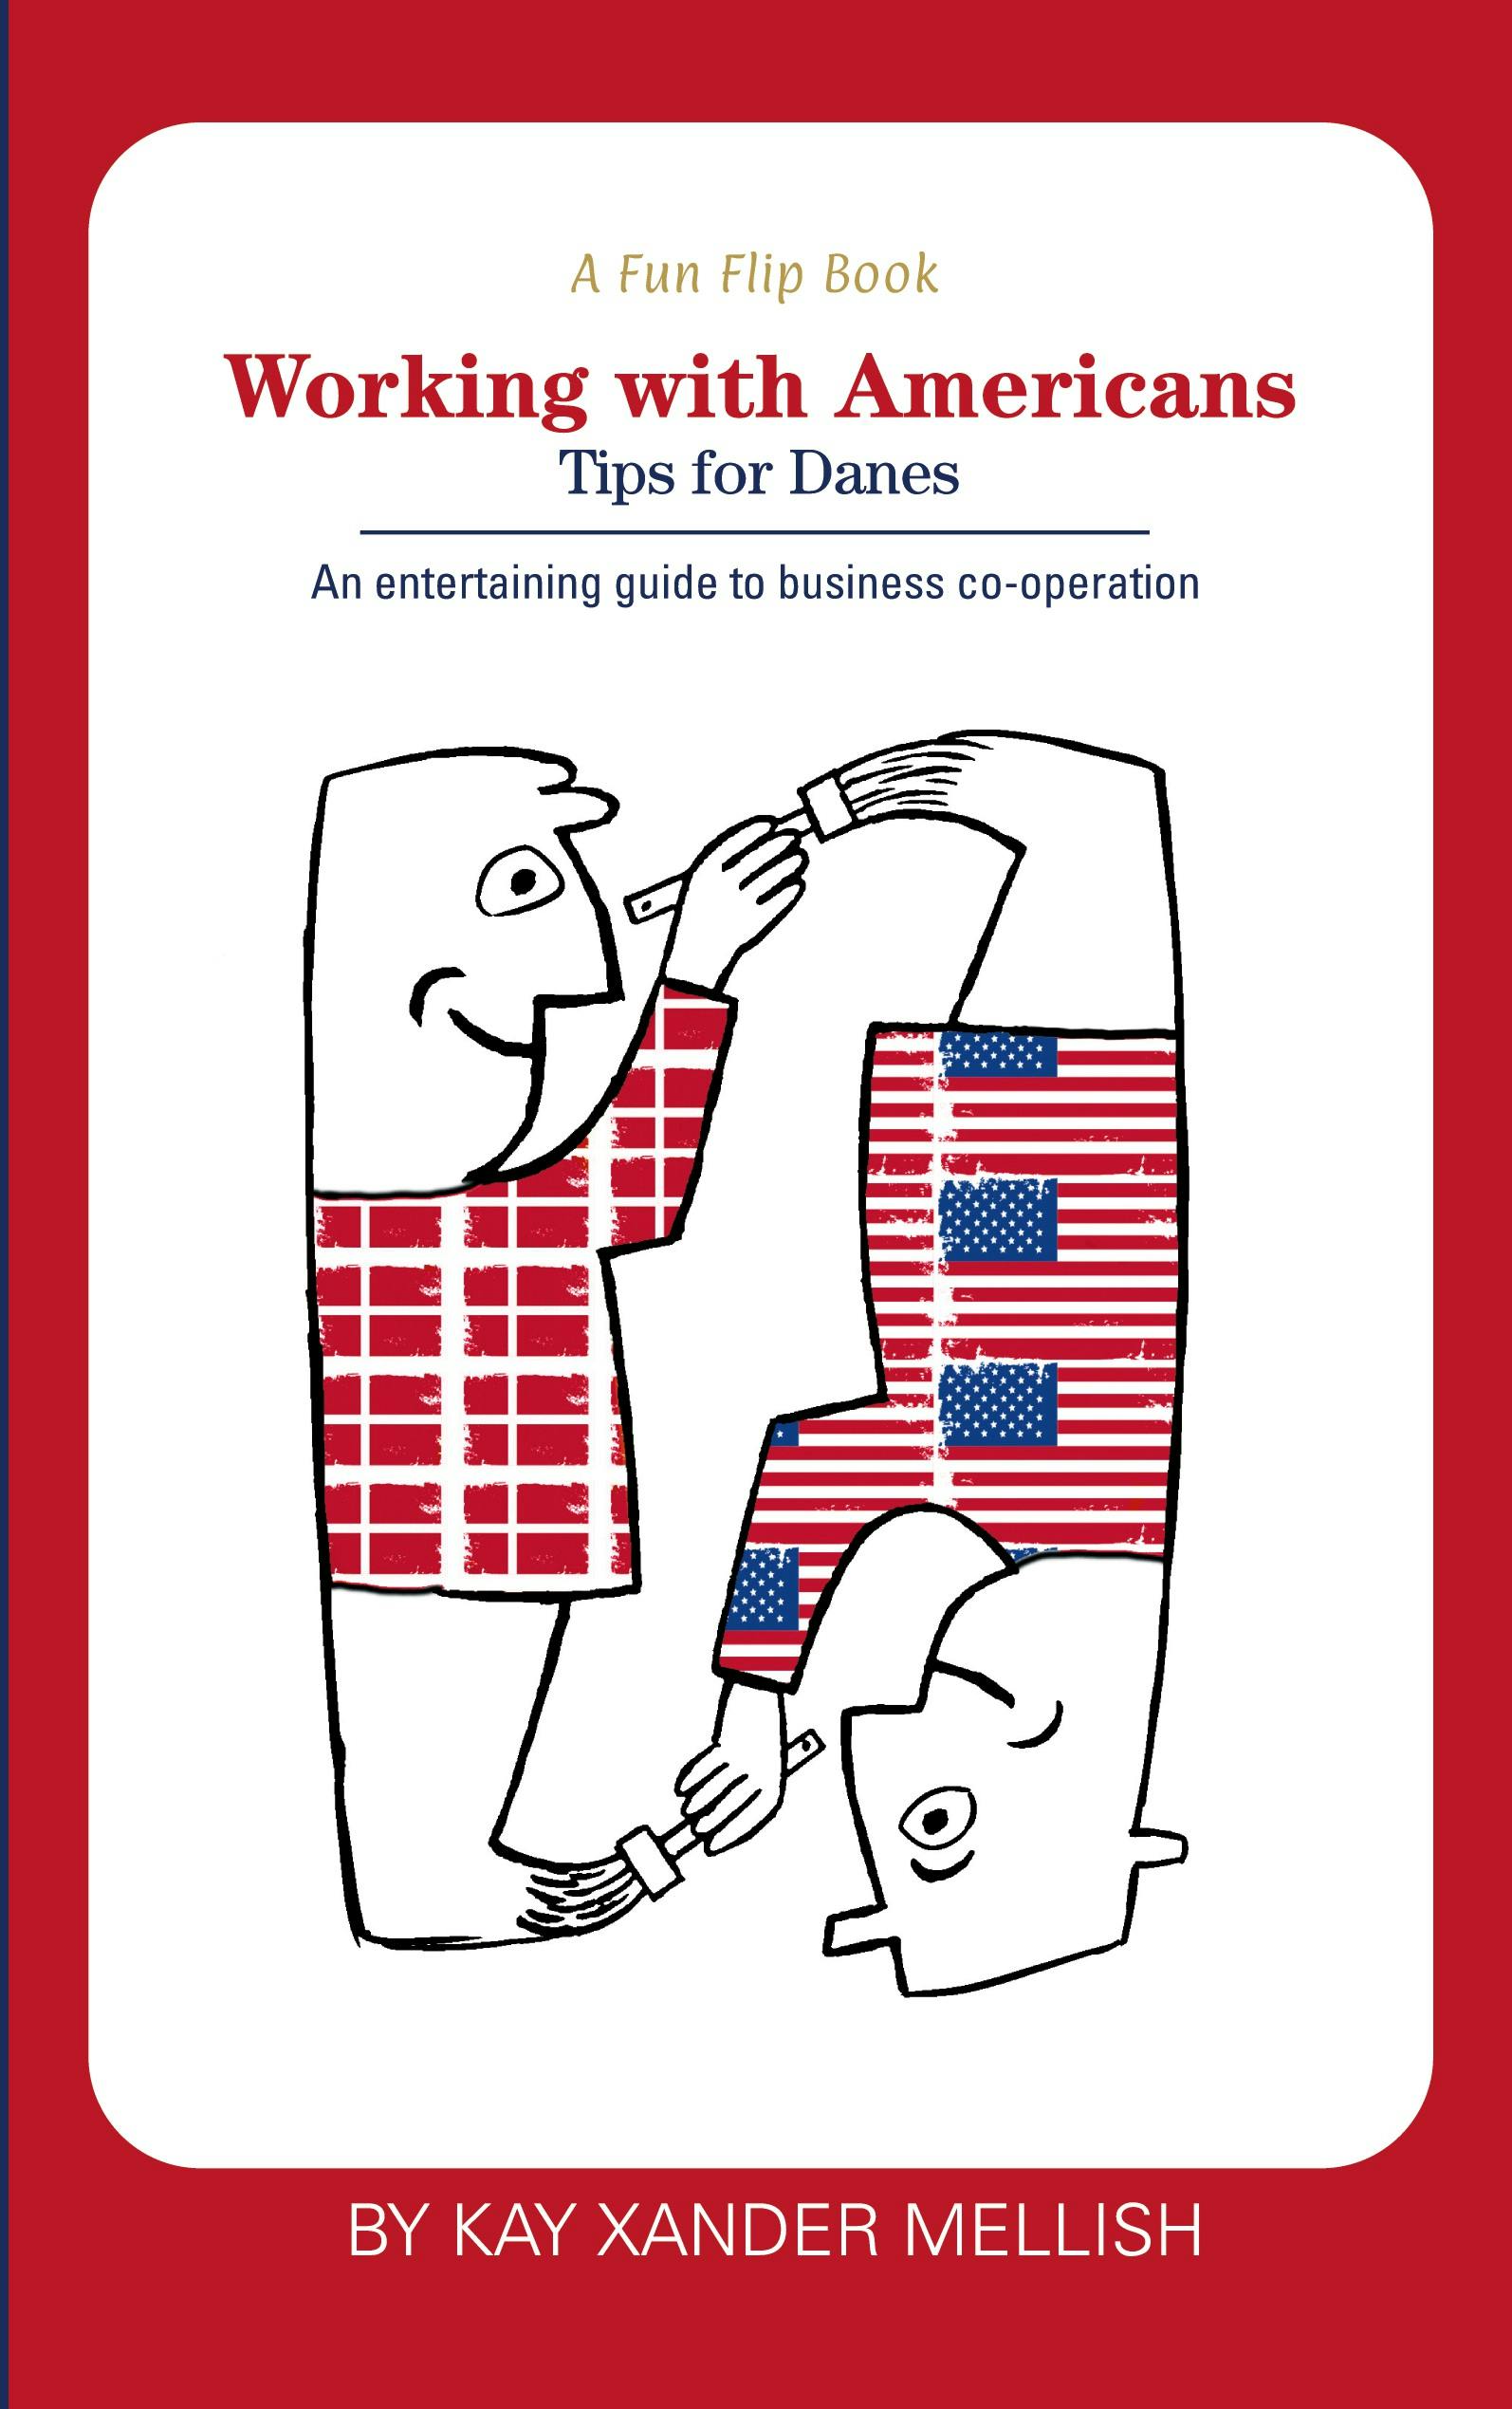 A fun flip book: Working with Americans and Working with Danes - Kay Xander Mellish